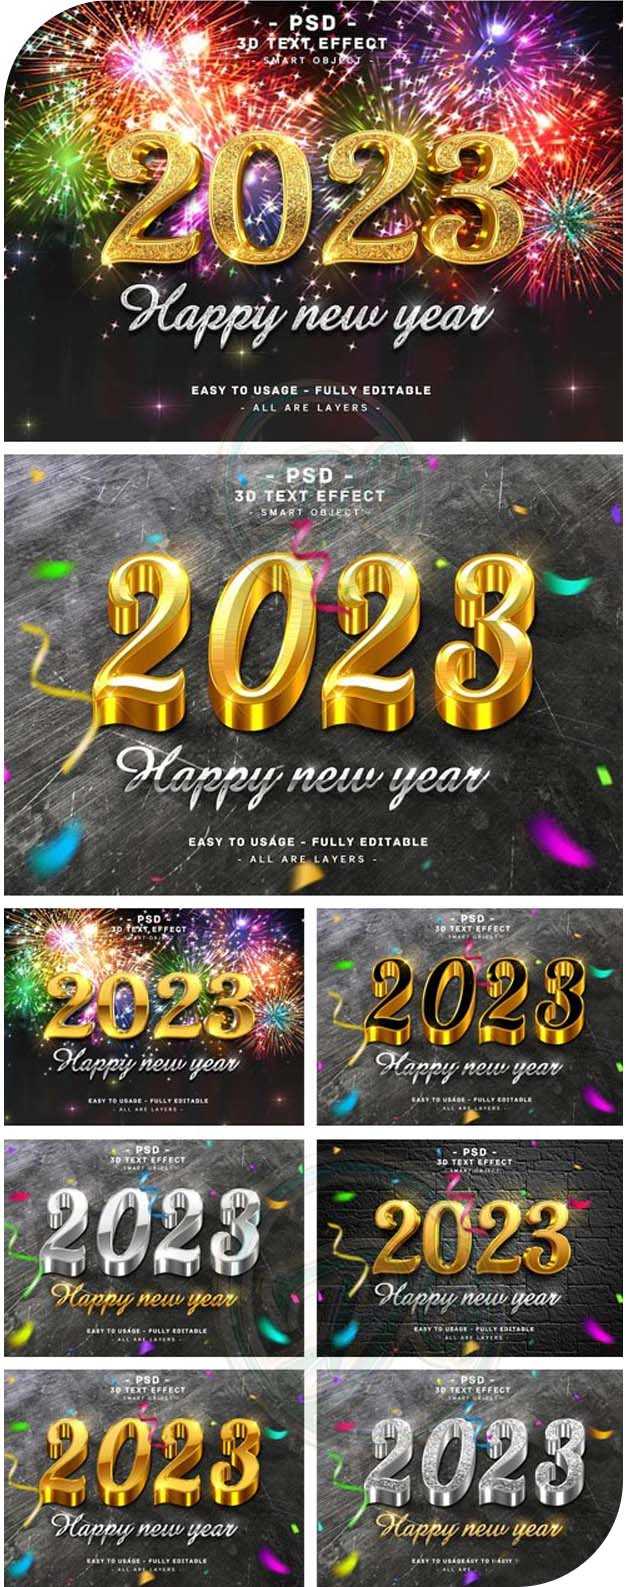 Happy New Year 2023 - 10+ Editable 3D Text Effects PSD Templates Free Download dgpik